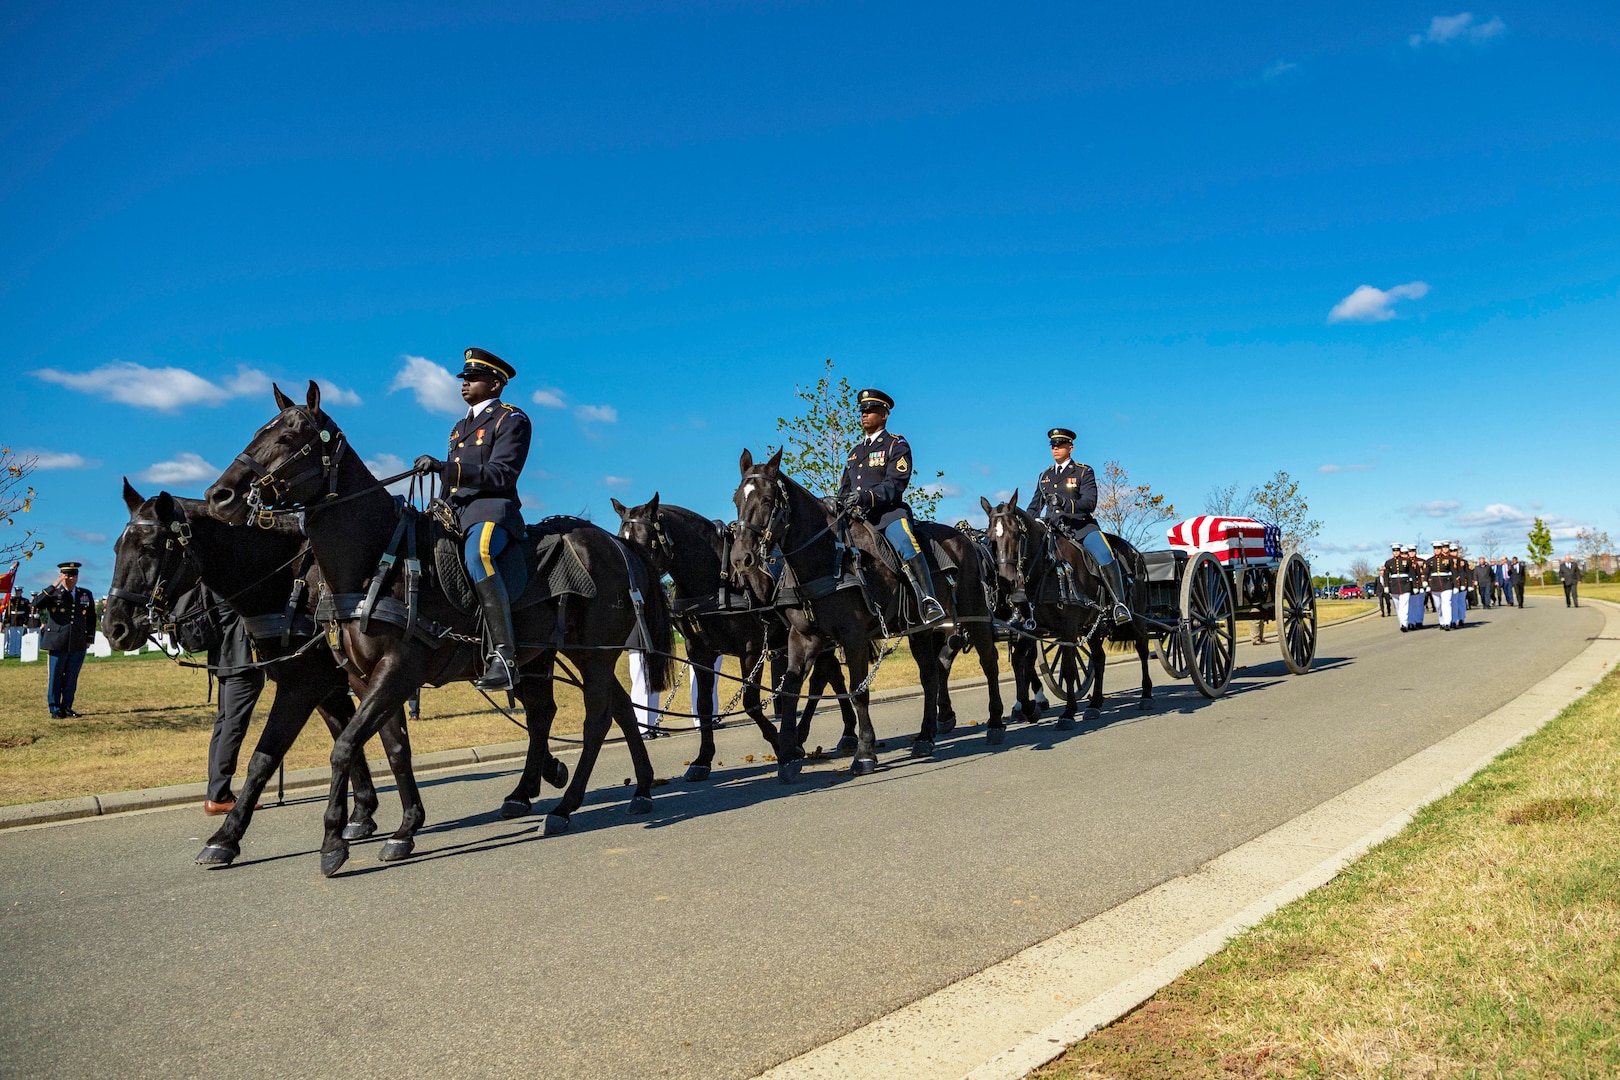 A group of soldiers ride horses escorting a coffin as Marines march behind.